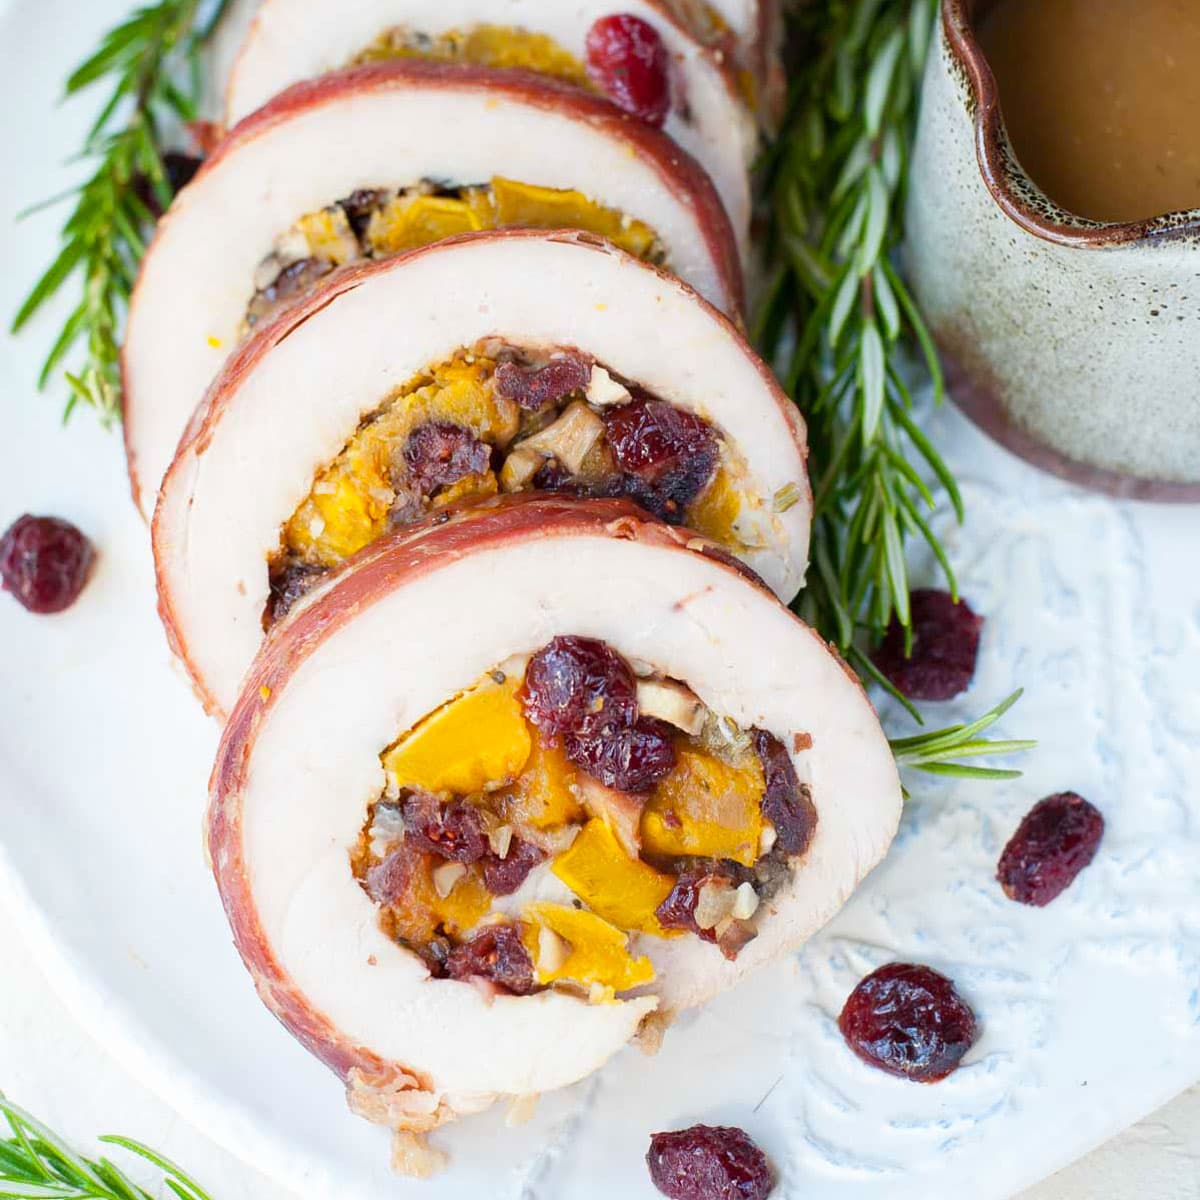 Turkey roulade stuffed with butternut squash and cranberries on a white plate.